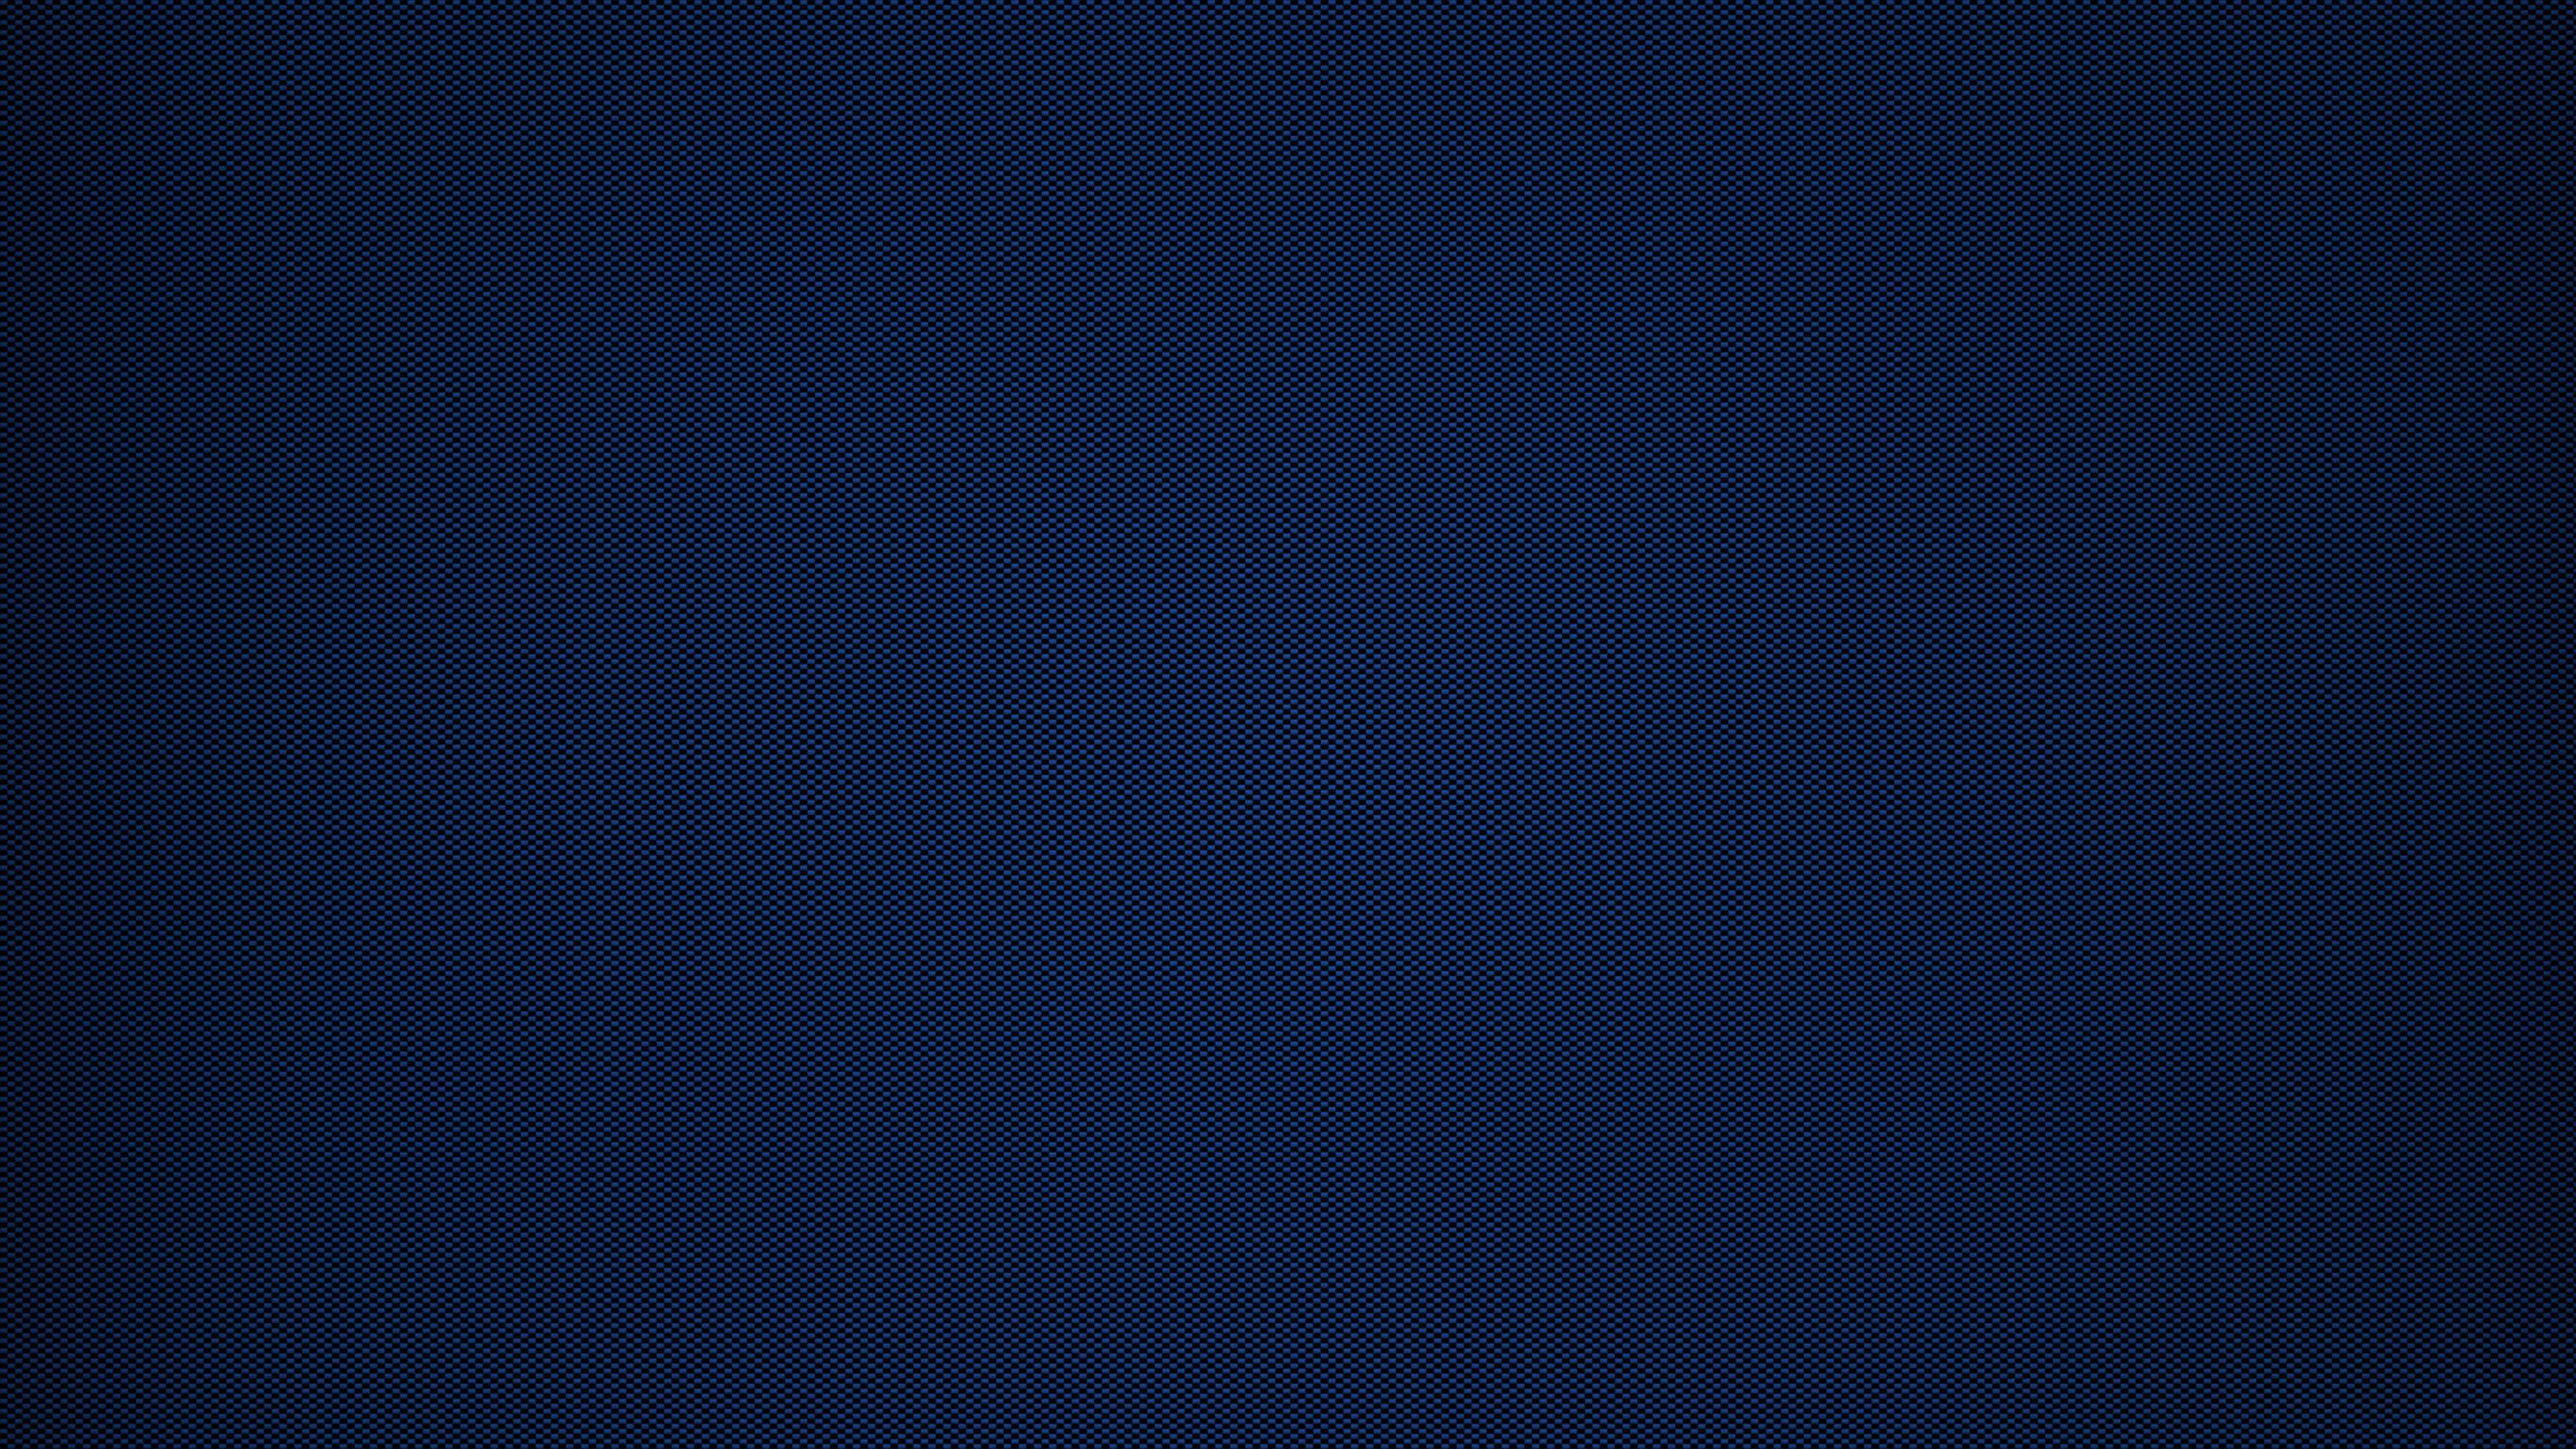  Blue  4K  Wallpapers  Top Free Blue  4K  Backgrounds  